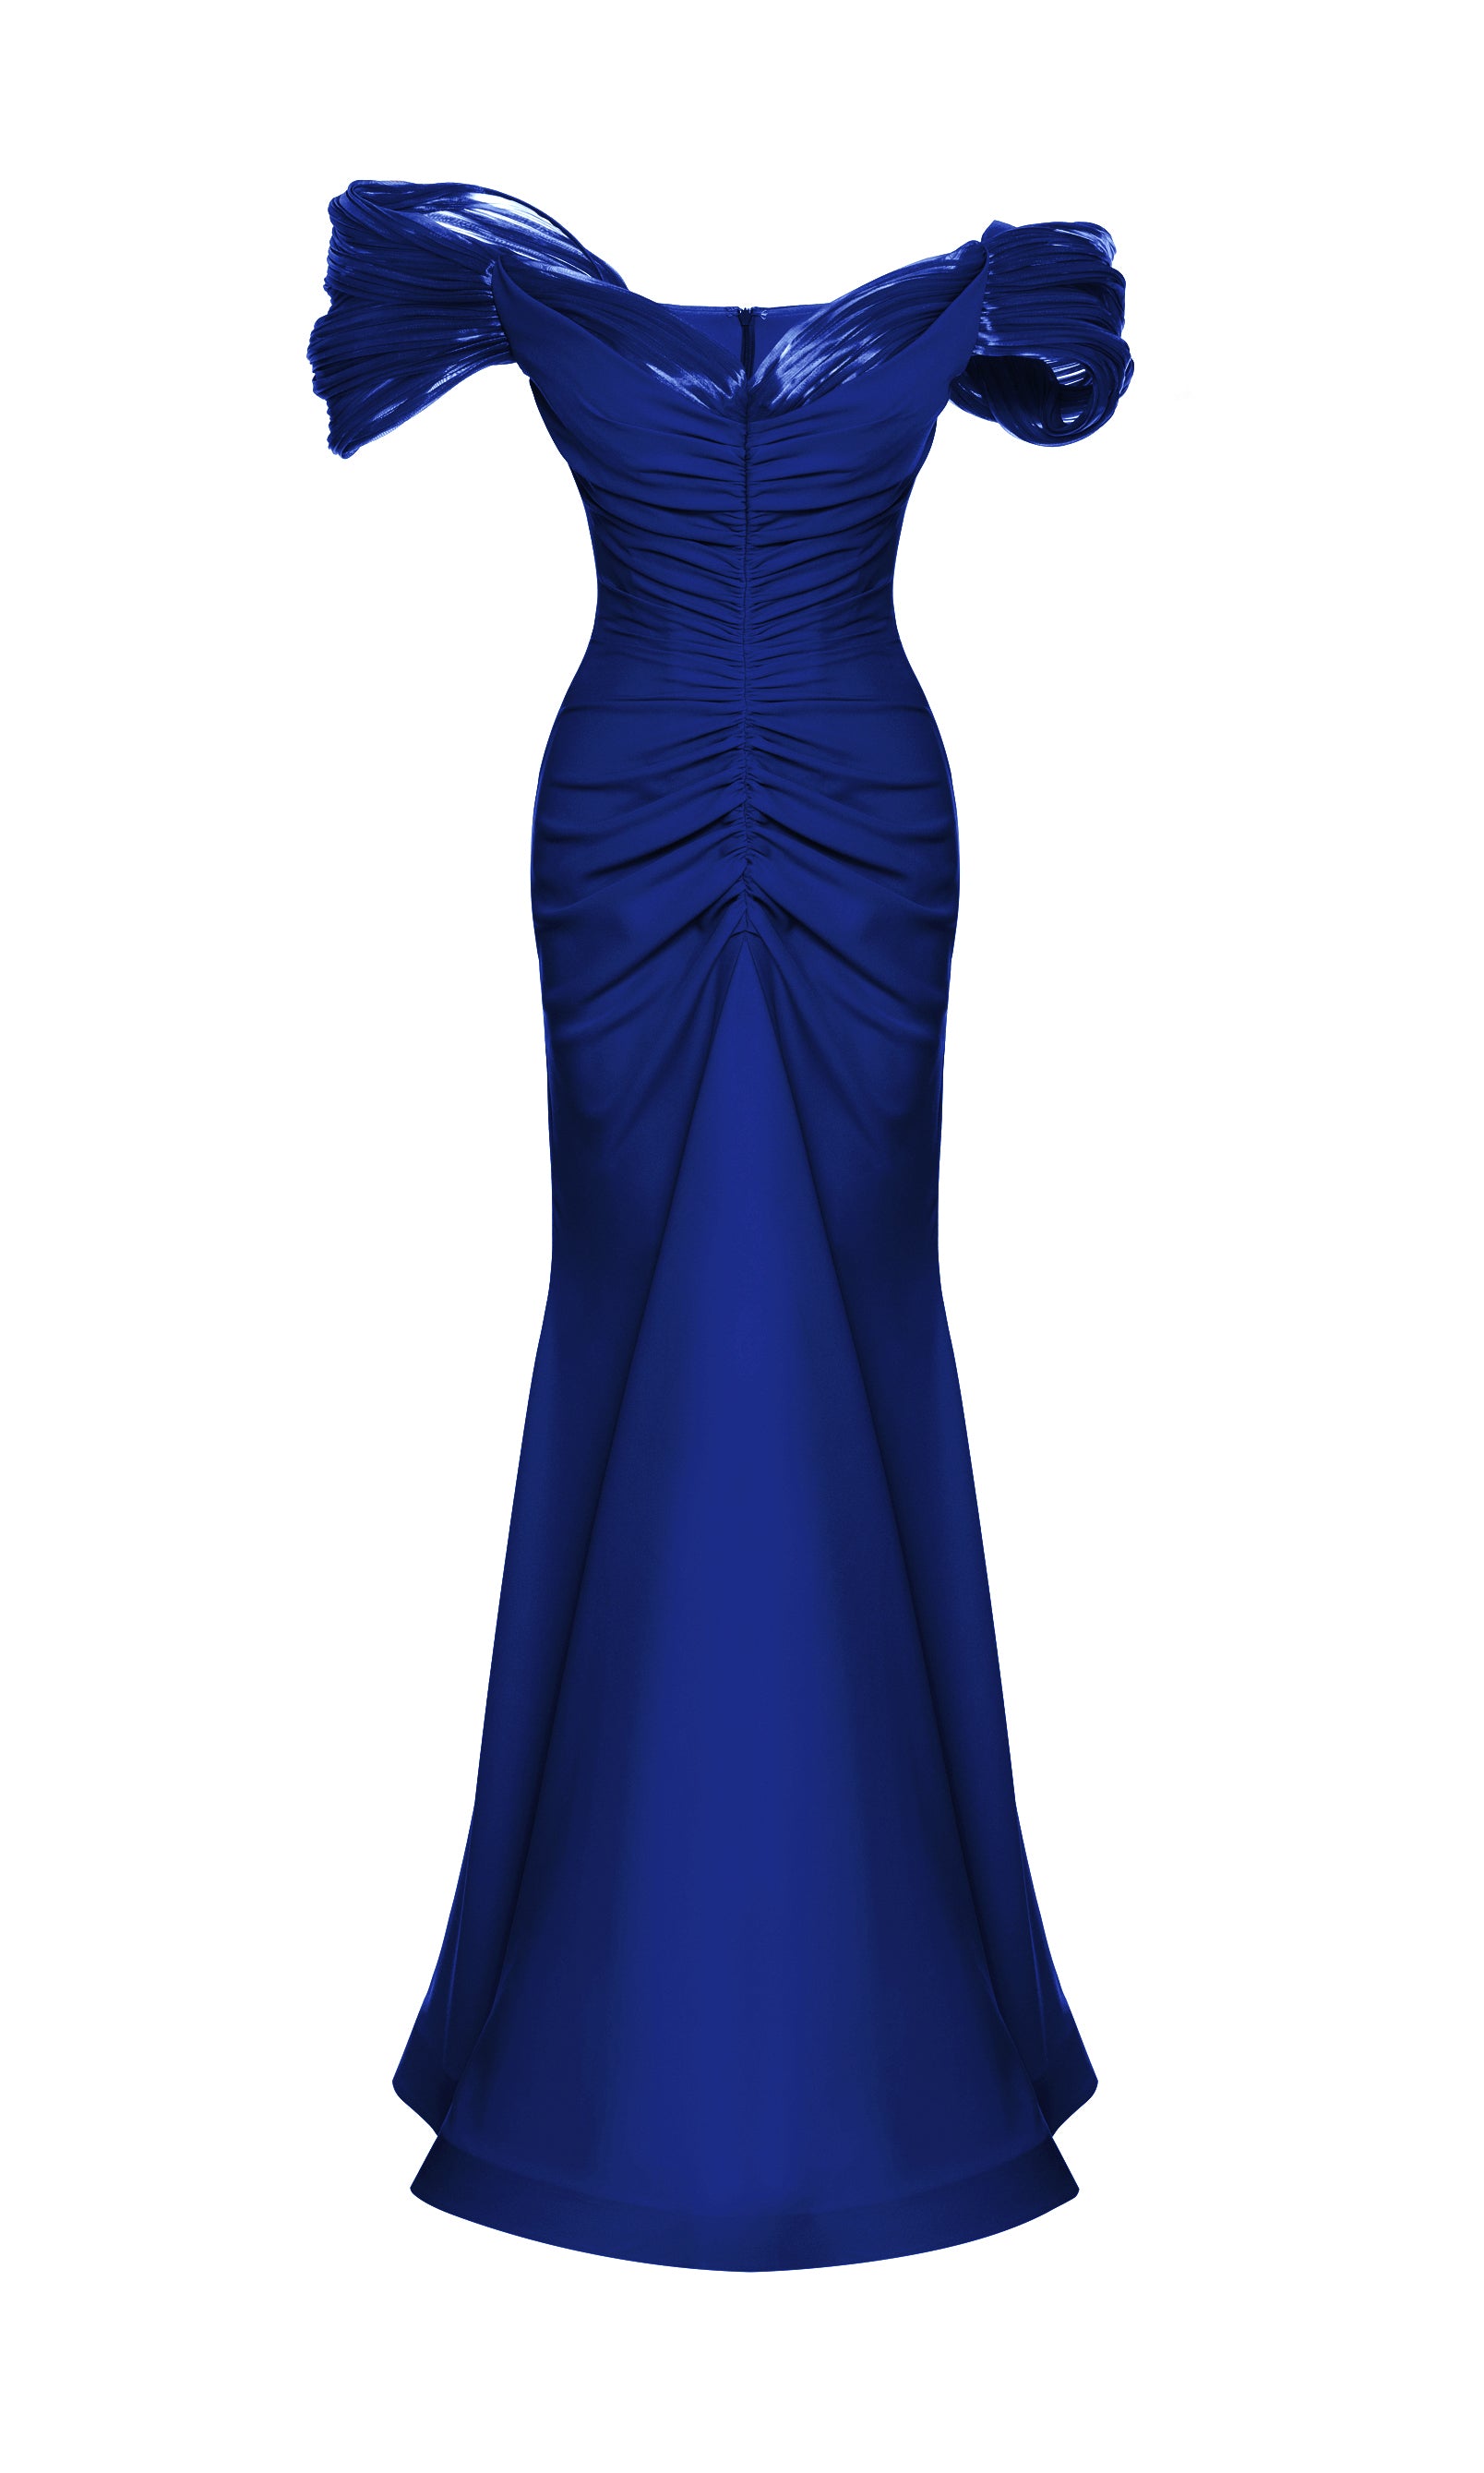 Shop the Stunning Bodycon Maxi Dress 2774 by Fouad Sarkis